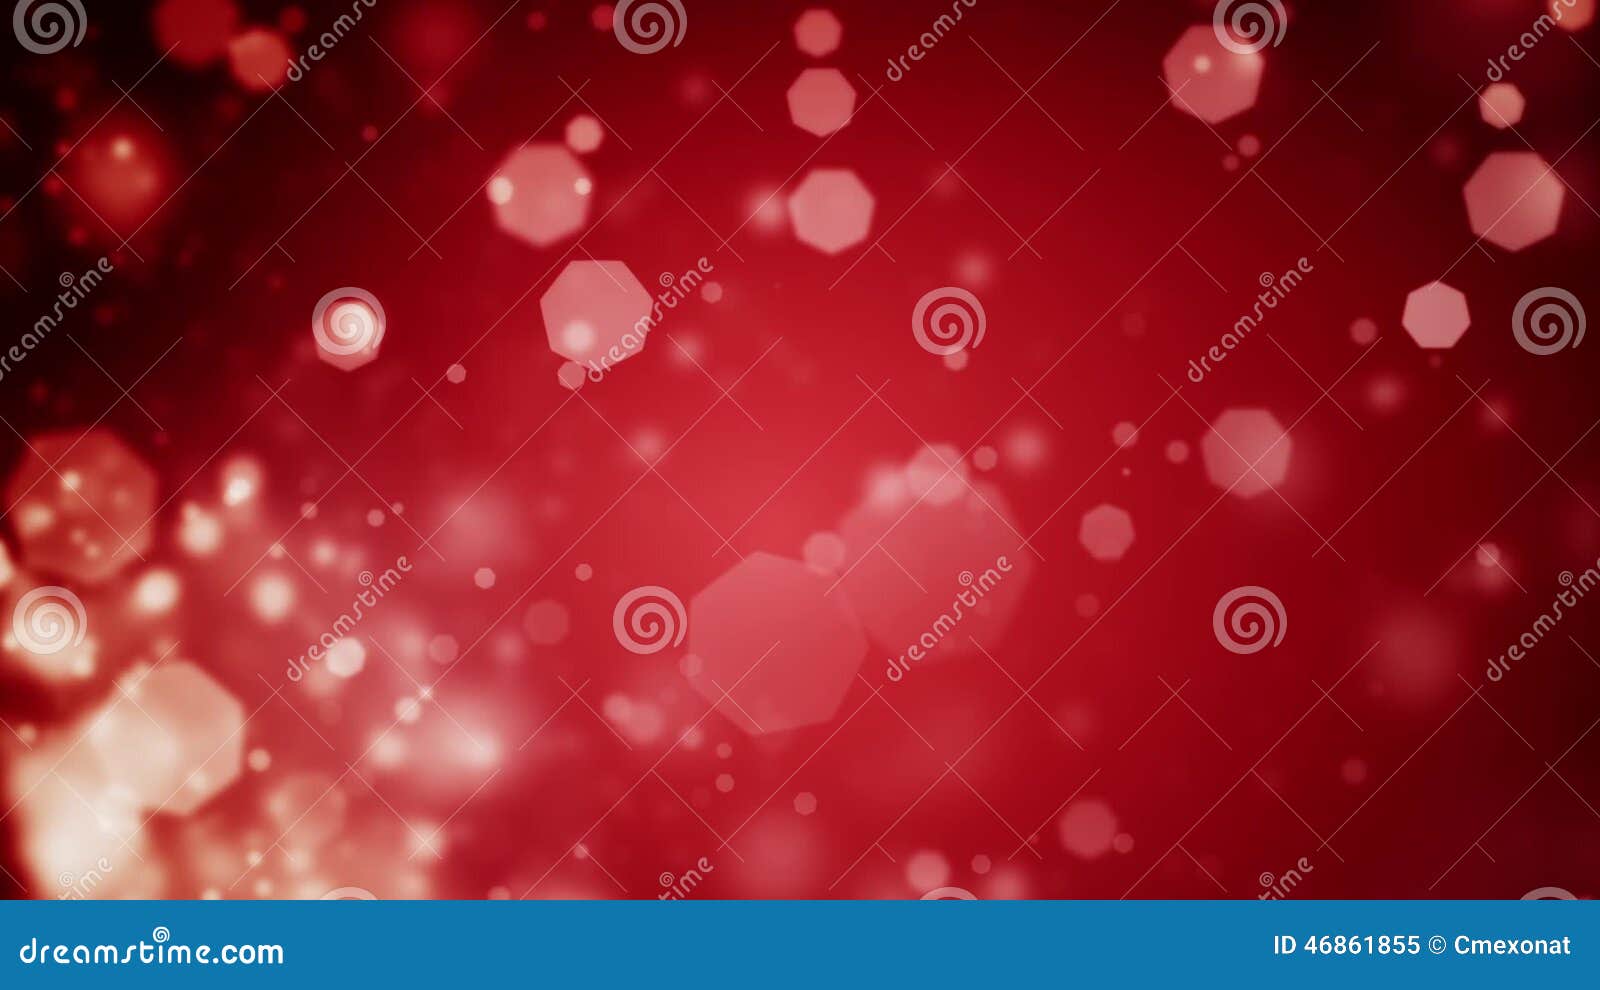 Abstract Dark Red Christmas Background With Bokeh Defocused Lights Stock Video Video of blur blurred